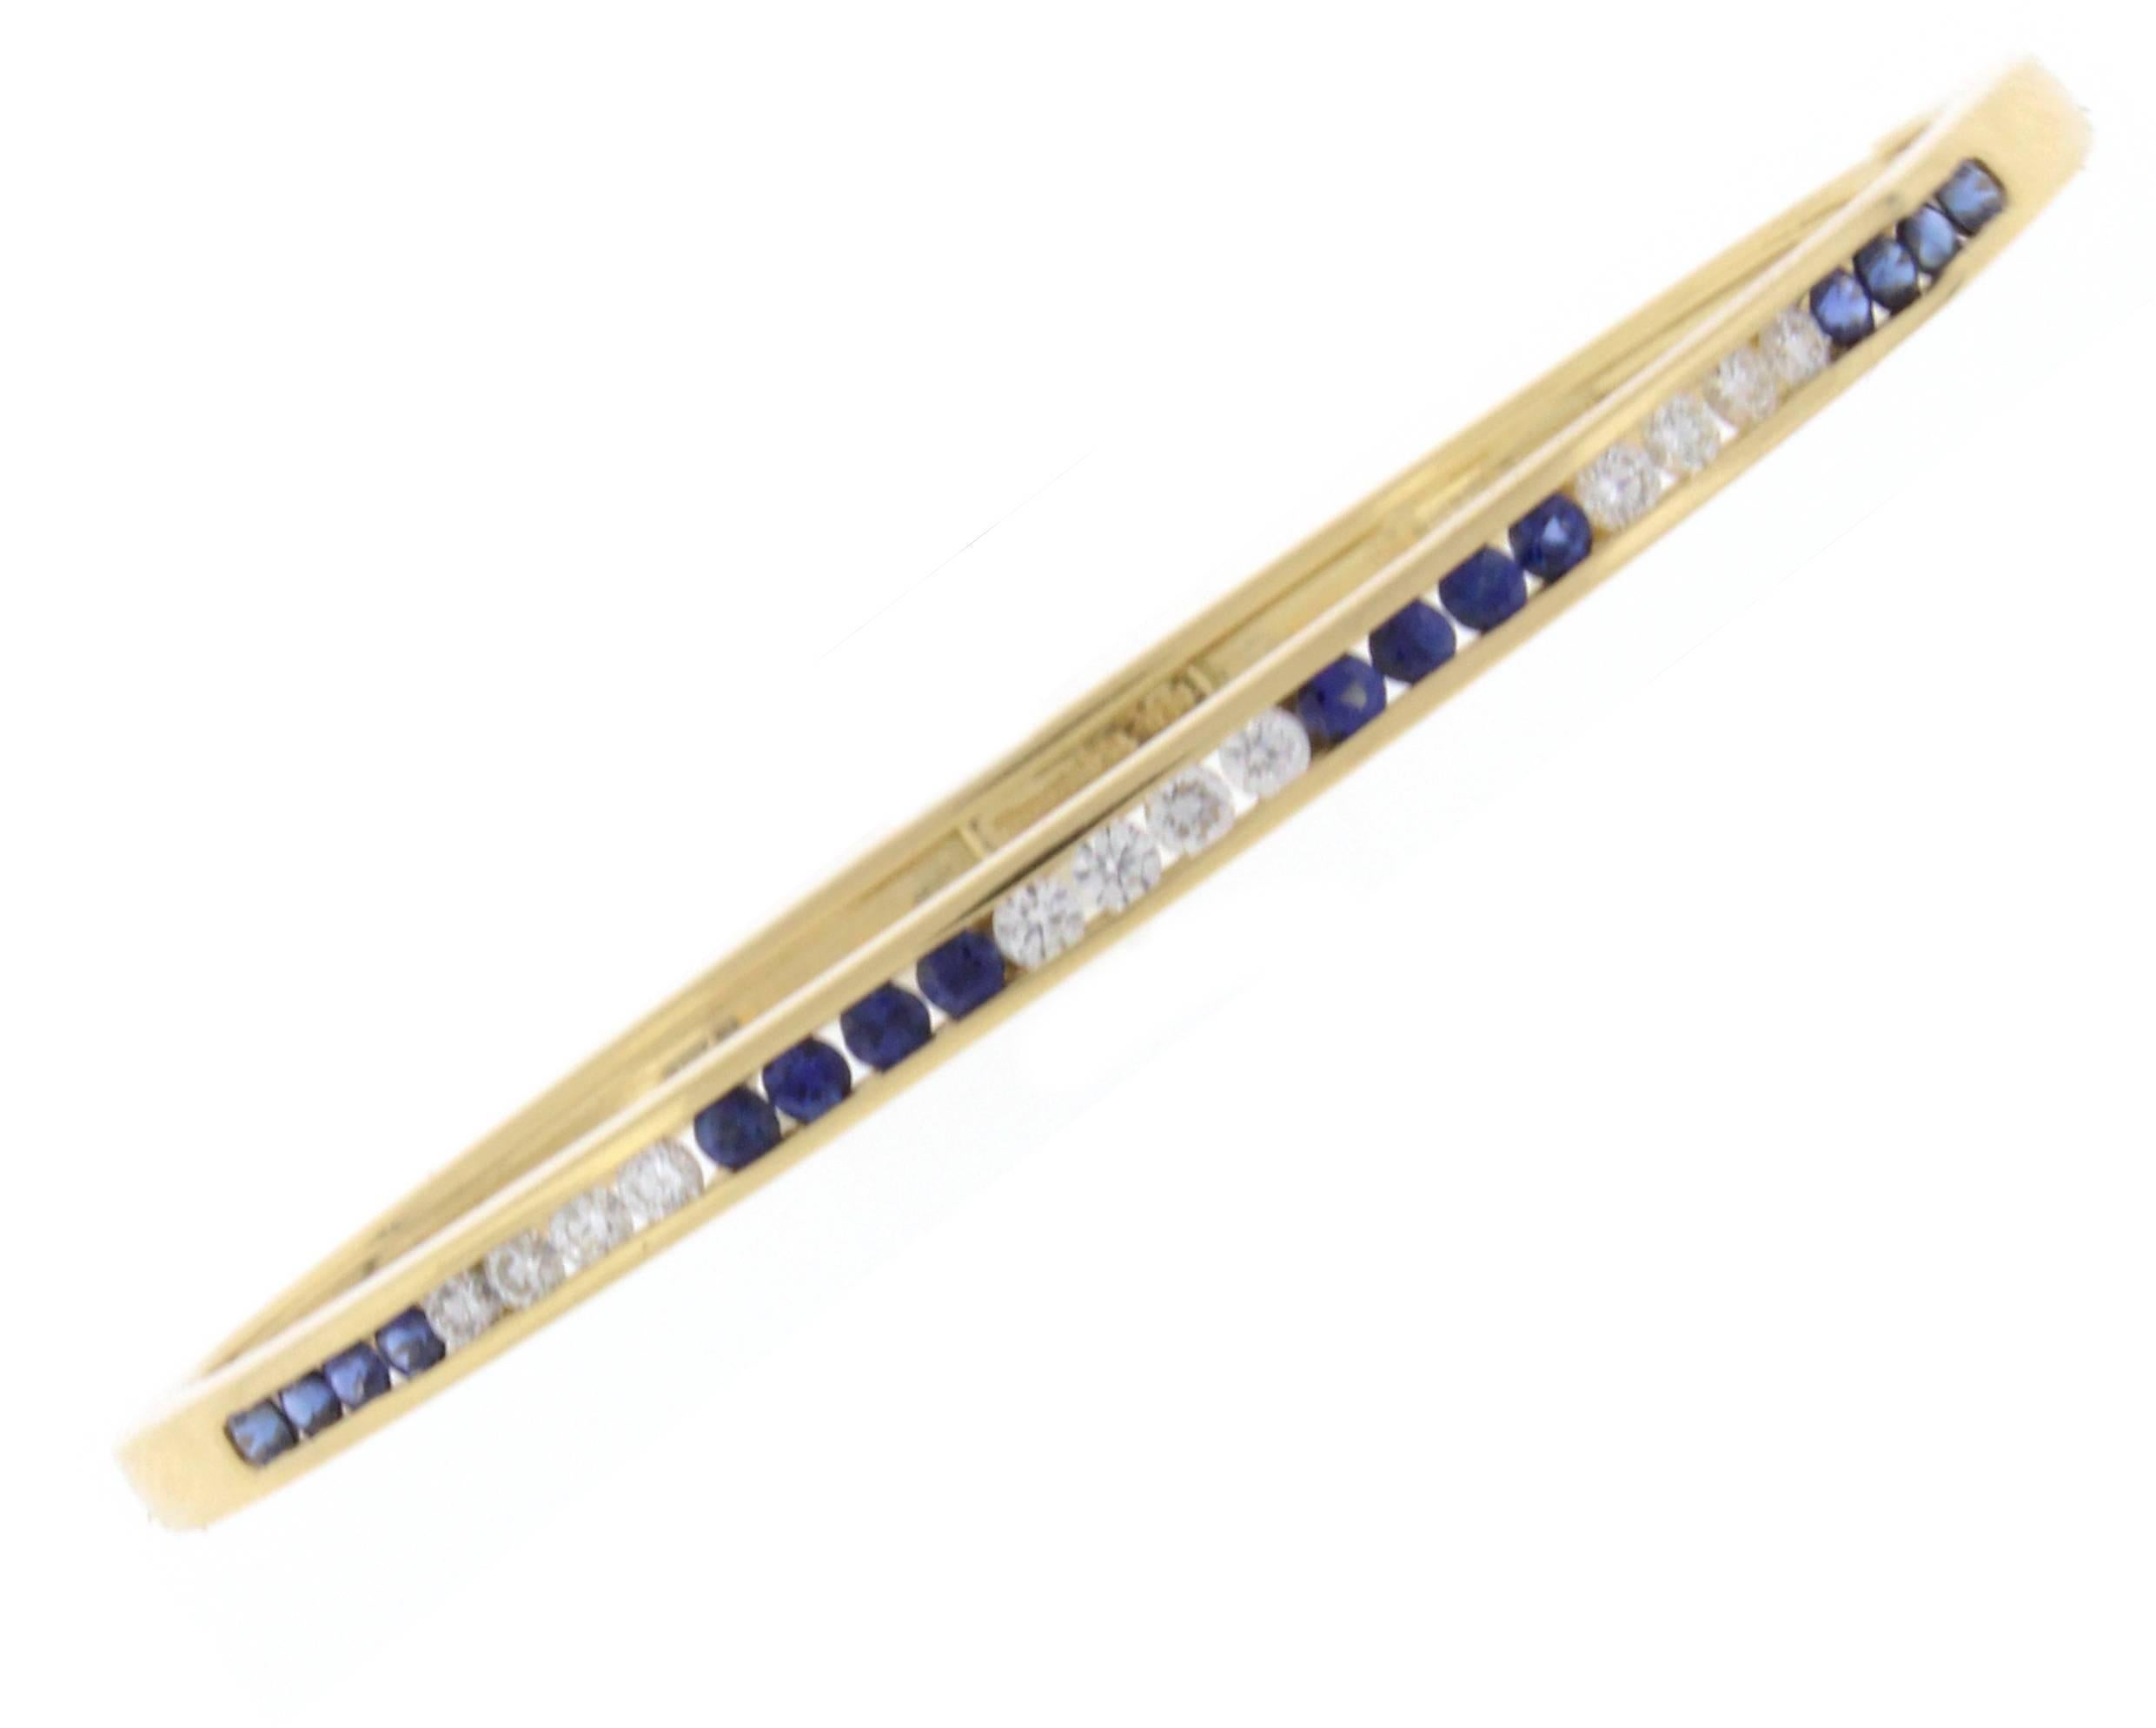 From Tiffany and Co. this 18 karat gold bracelet featureing sixteen sapphires weighing .64 carats and twelve diamonds weighing .36 carats. Fit a 6 inch wrist